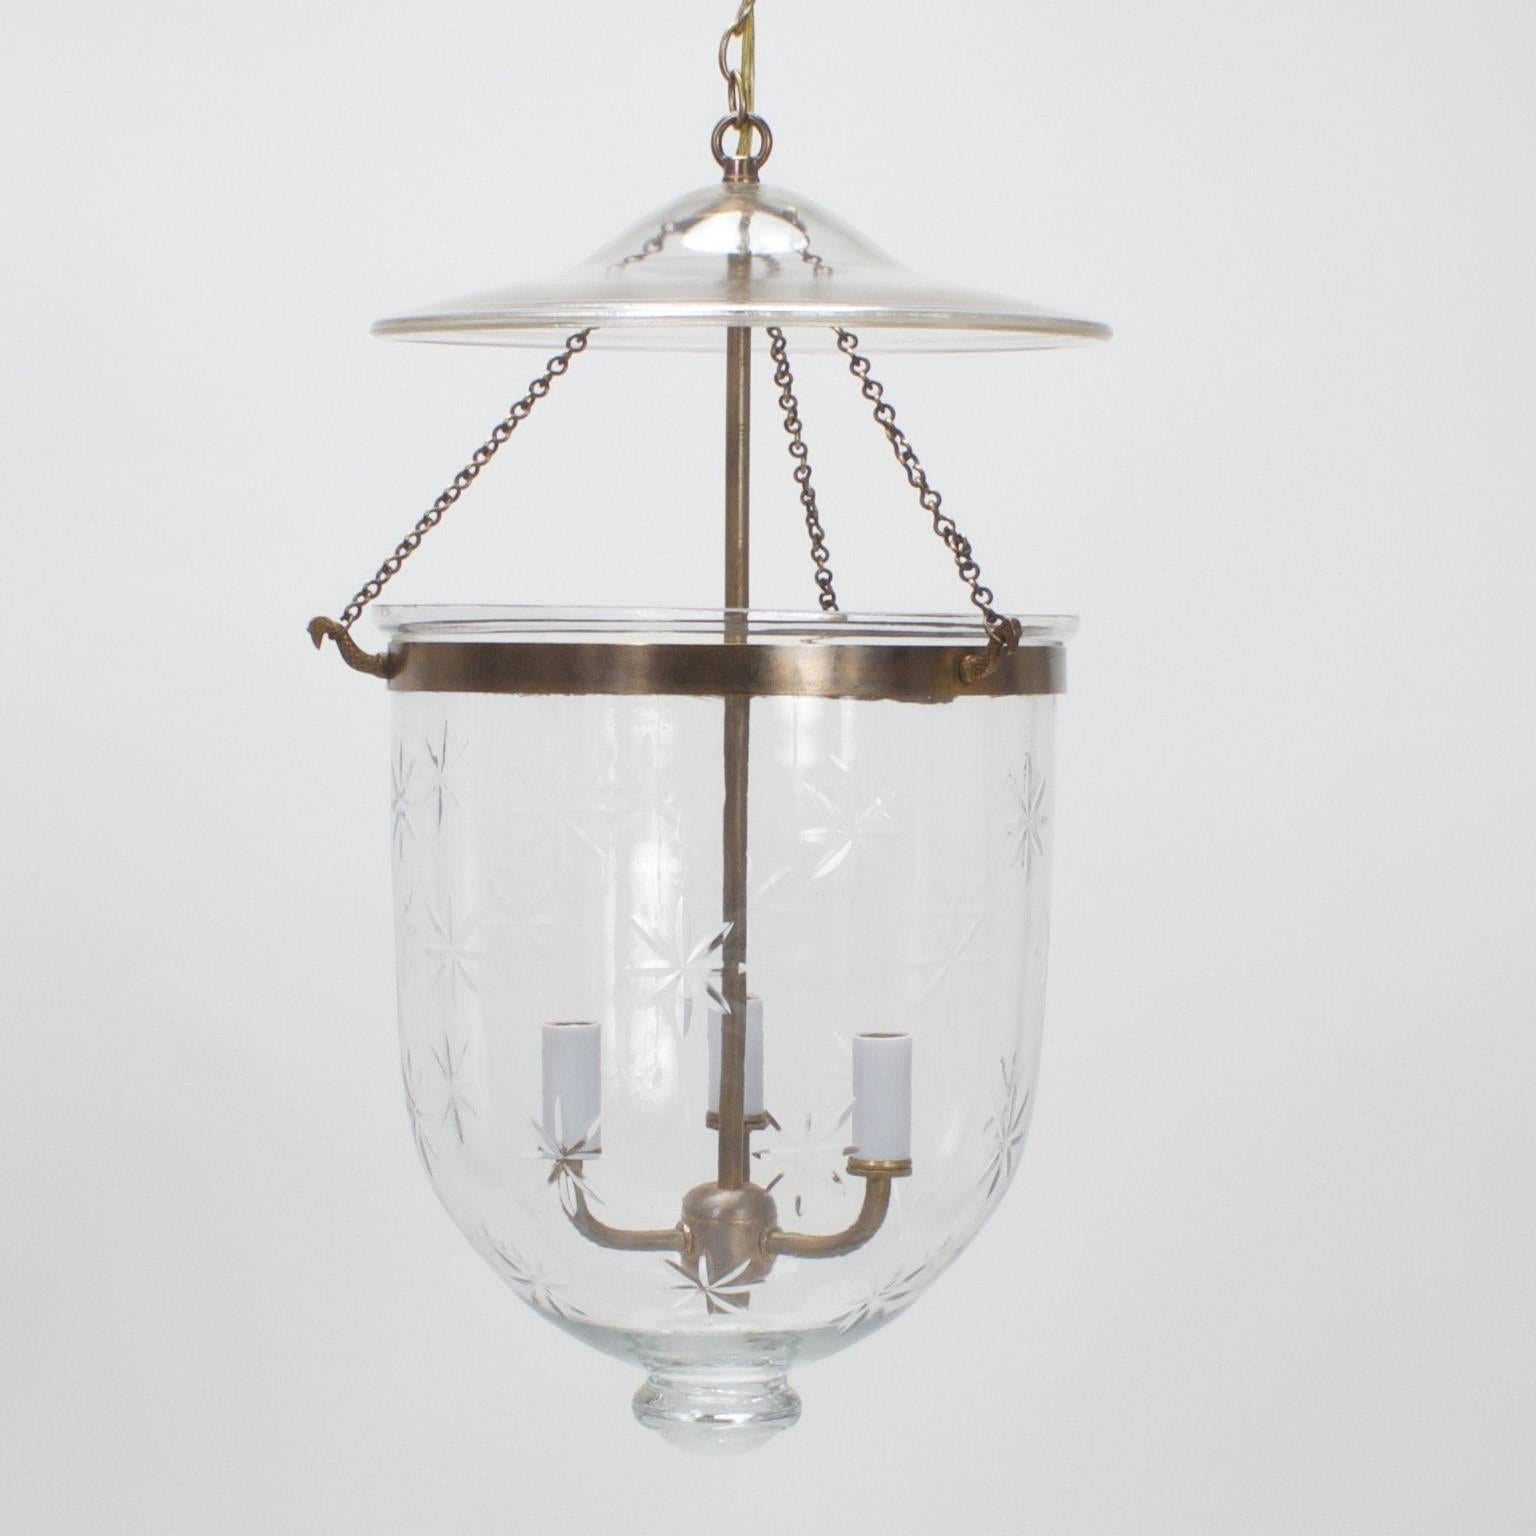 Smoke bell jar lantern or light fixture composed of burnished brass and handblown glass with cut stars that will put an extra twinkle in your night. This spirited pendants has a traditional form that still seems fresh today.

   